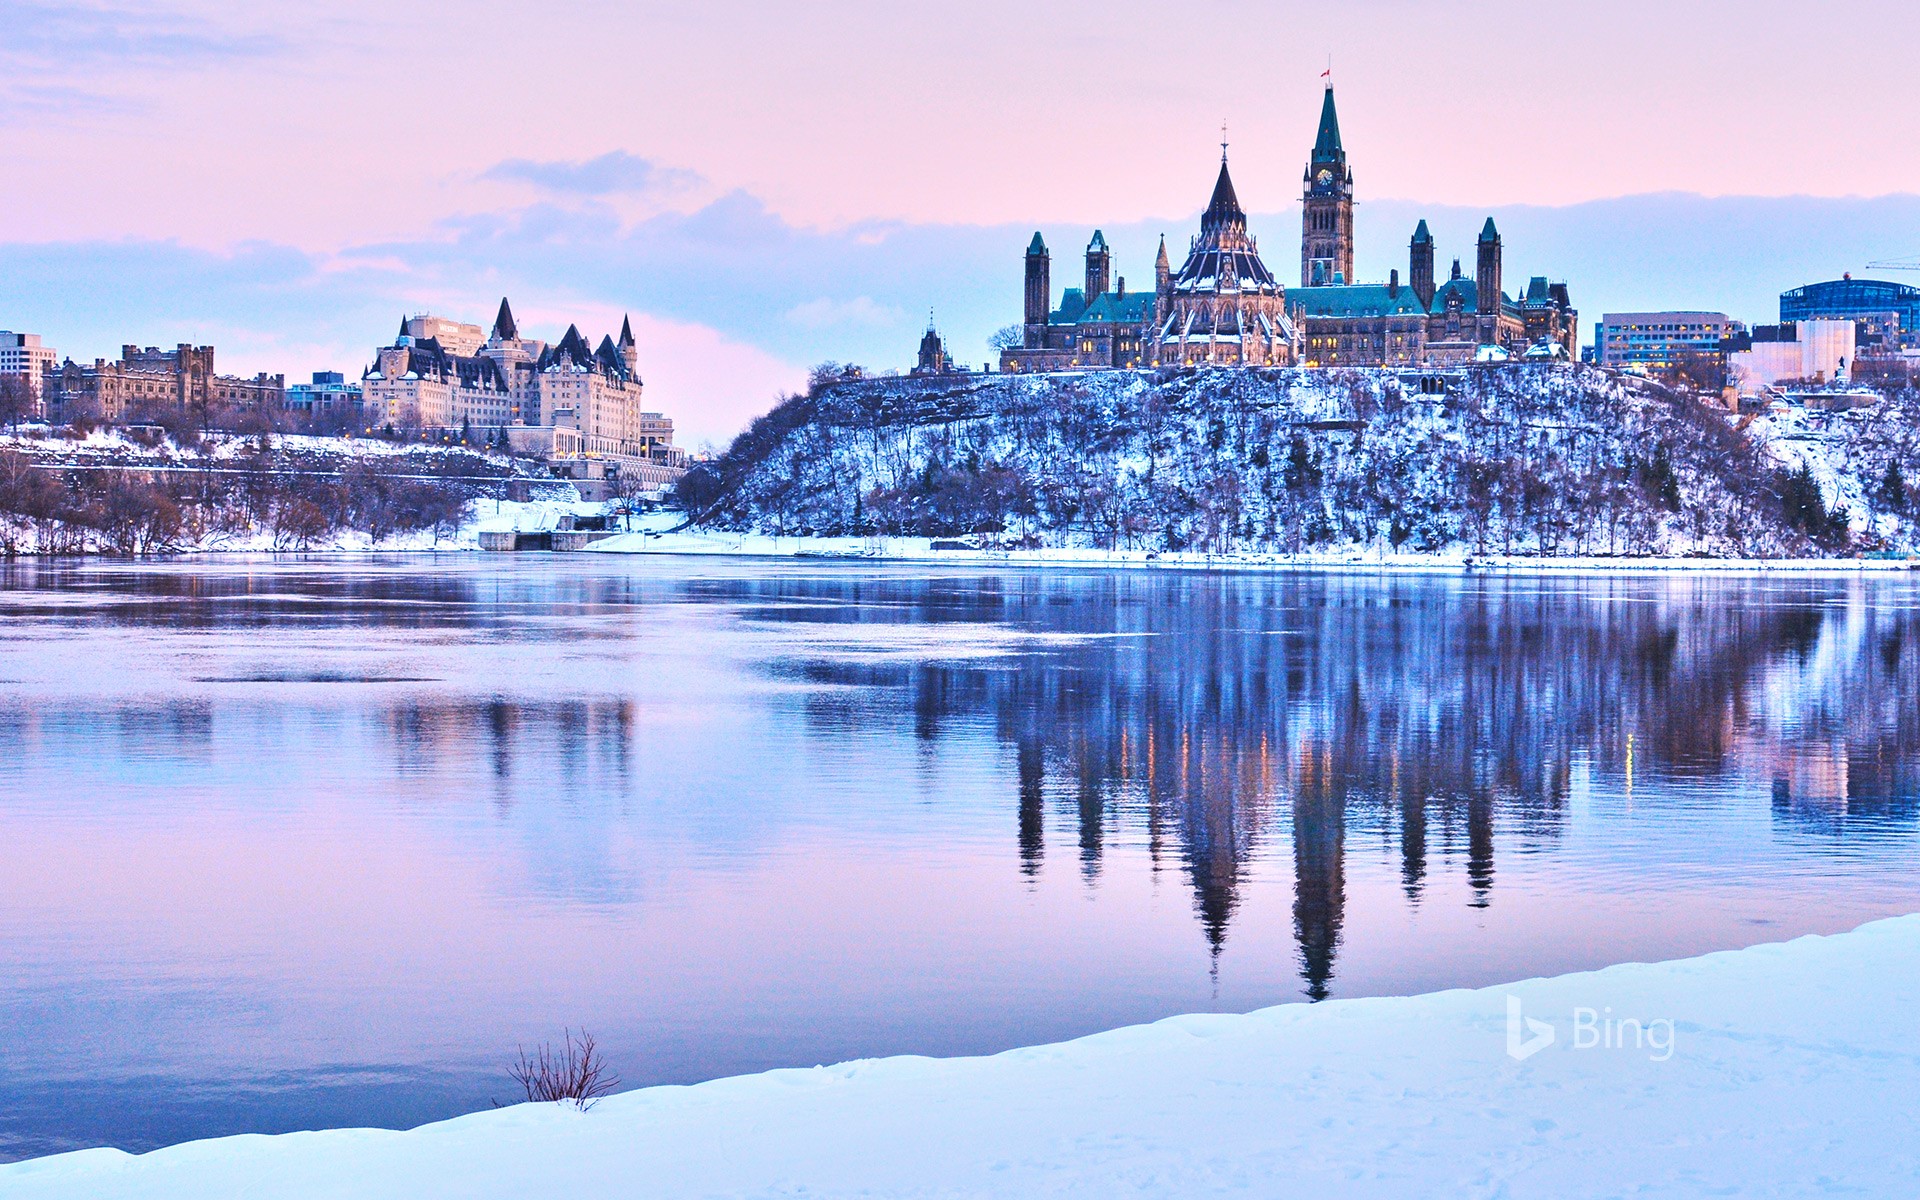 View of the Parliament Hill in winter, Ottawa